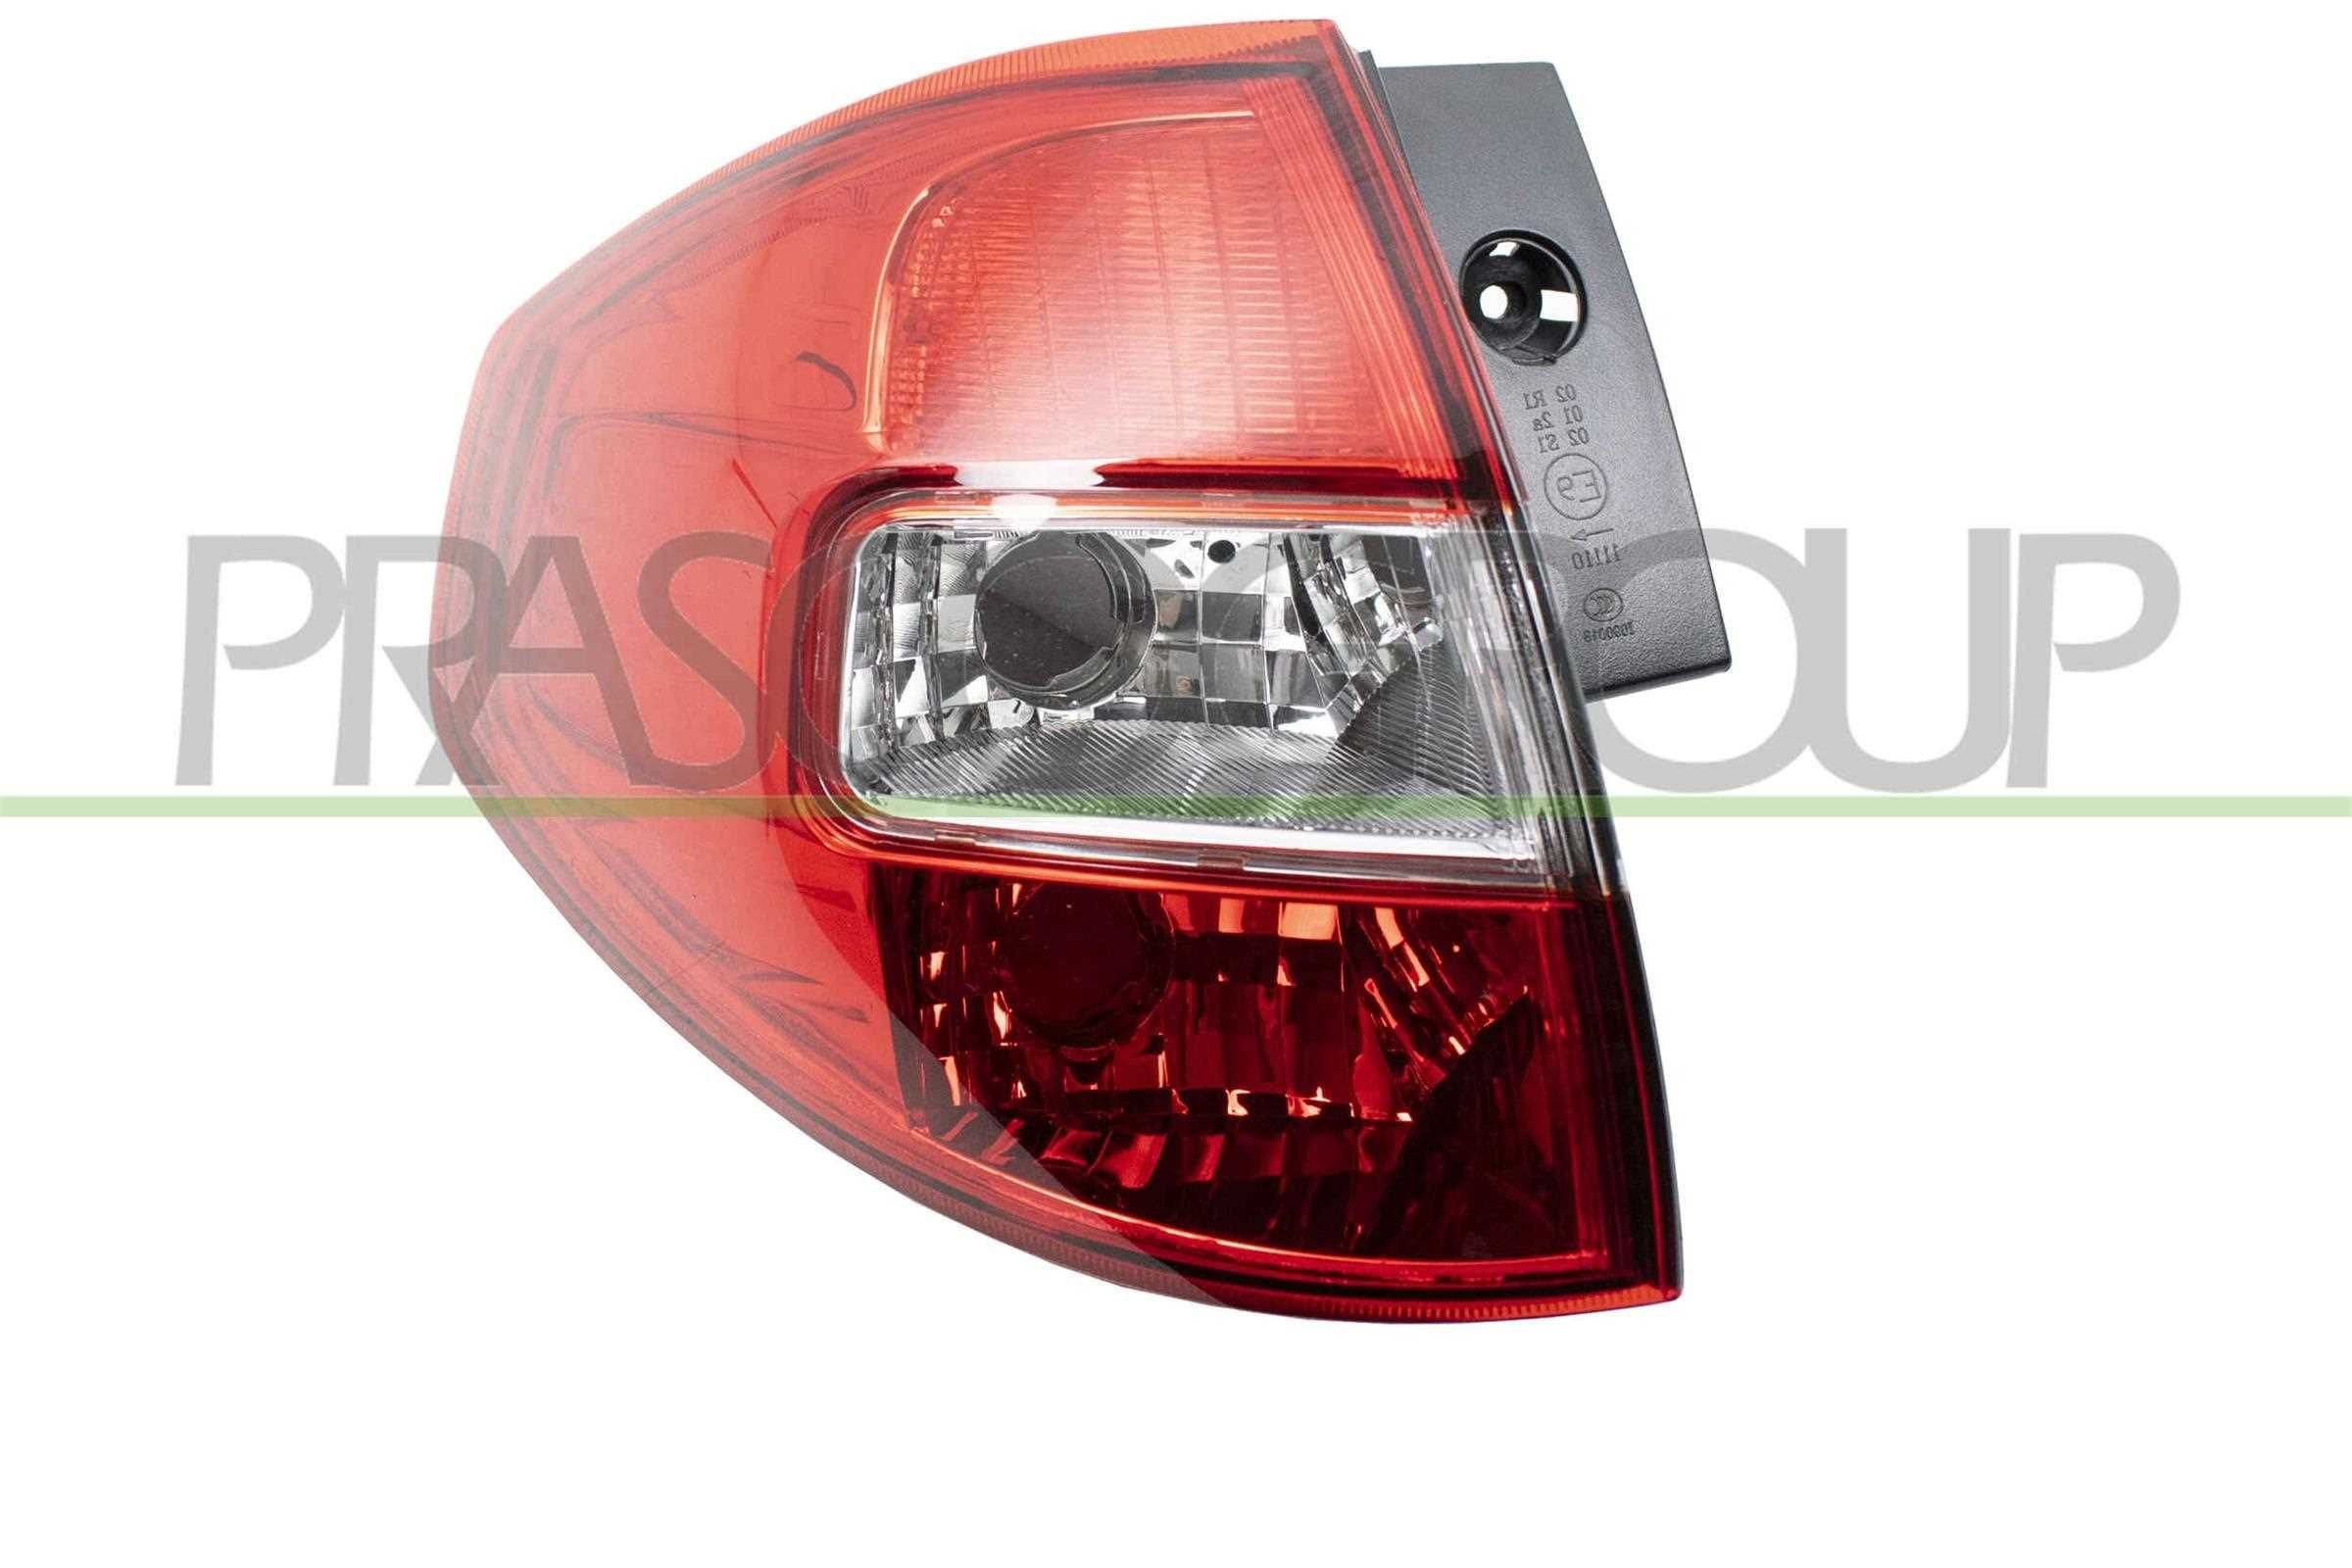 PRASCO RG0413120 Hood and parts ROVER 200 1995 price